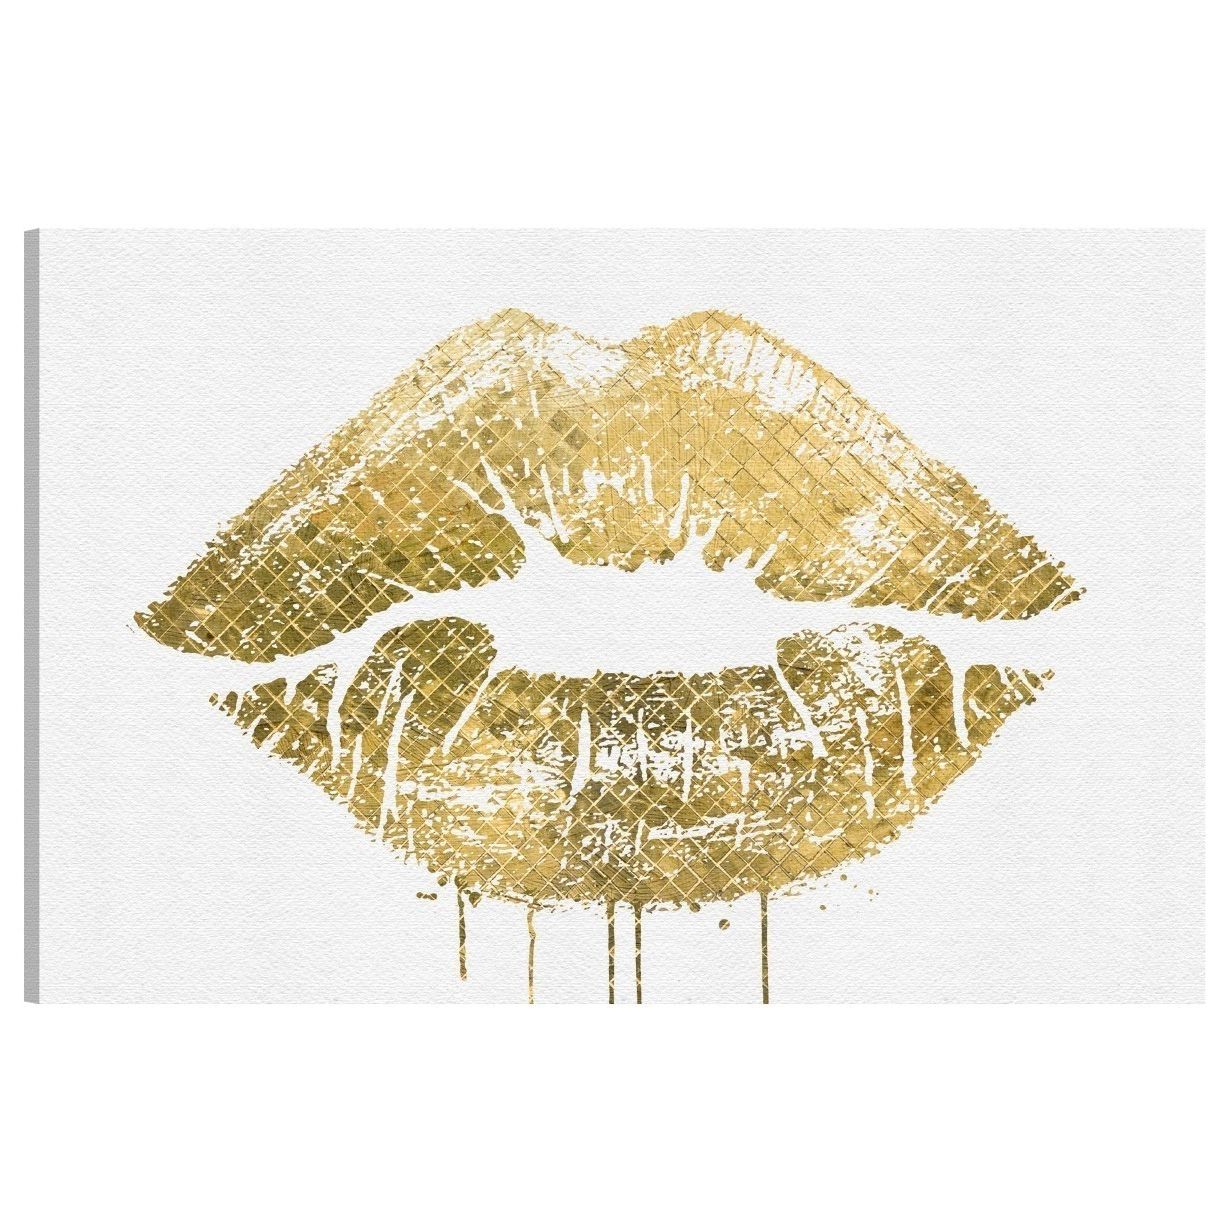 Preferred Stunning Design Gold Wall Art Stickers Decor Canvas Uk, Metal Wall Throughout Gold Wall Art (View 8 of 15)